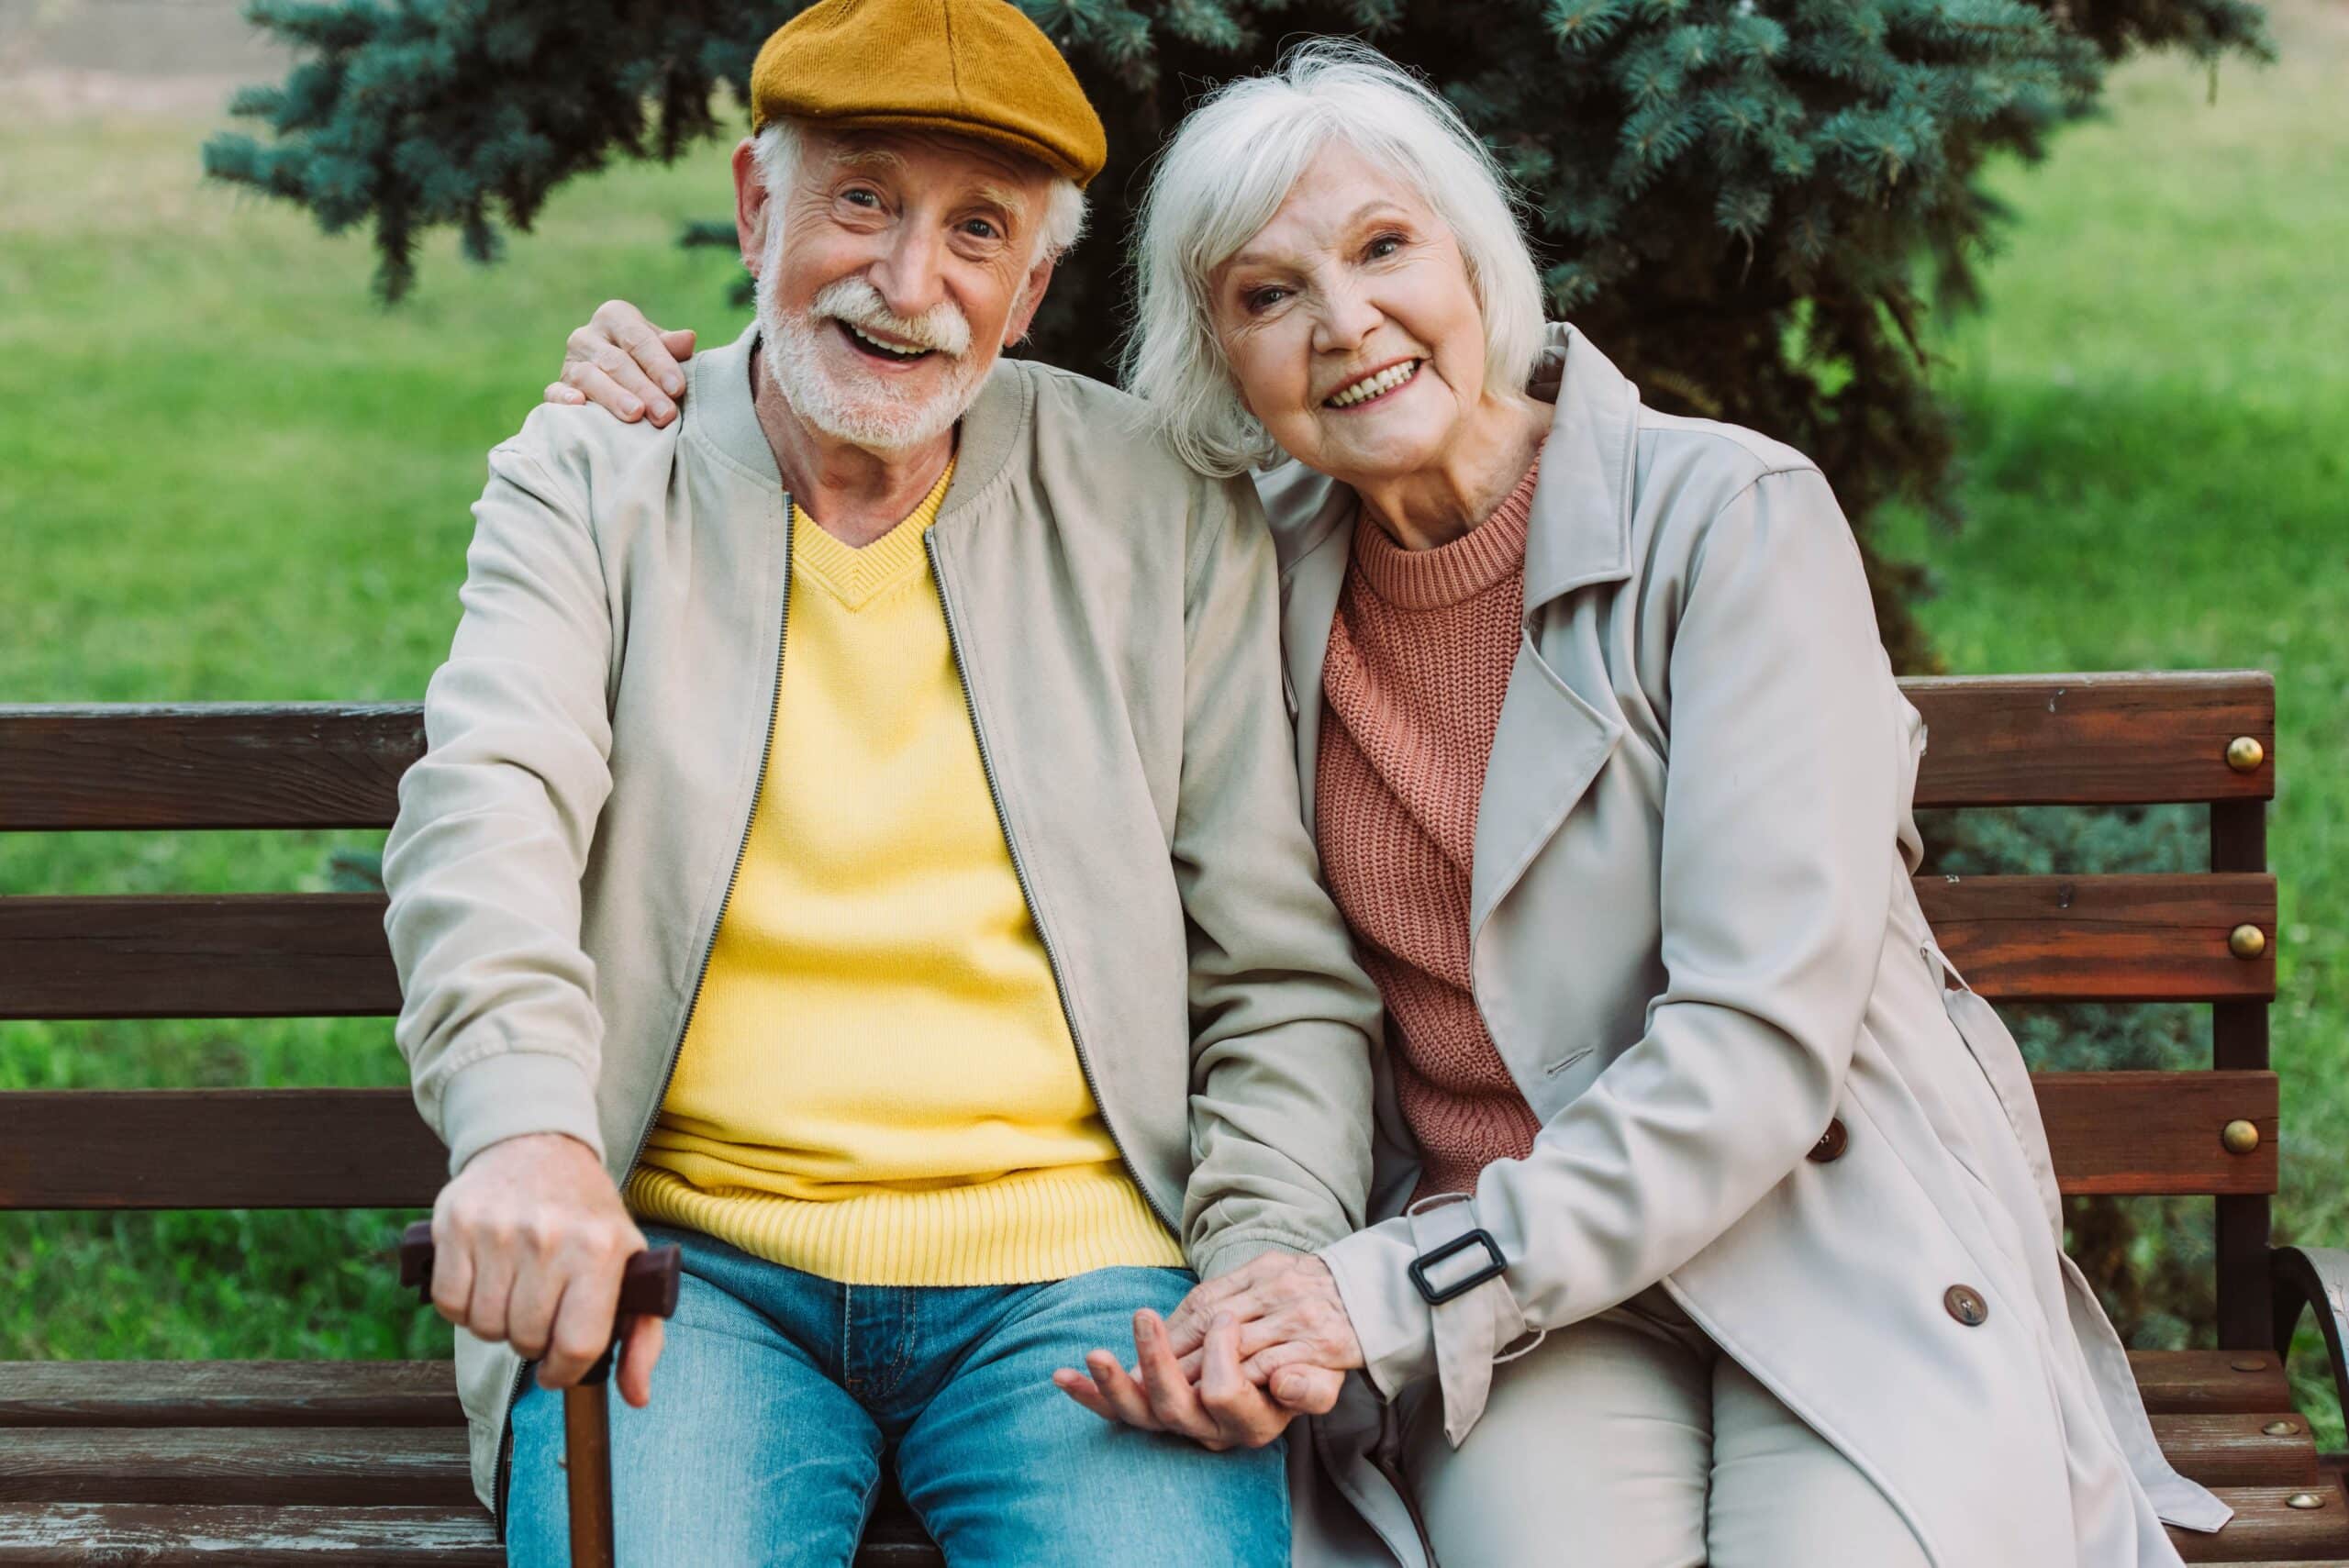 Smiling senior couple holding hands on park bench